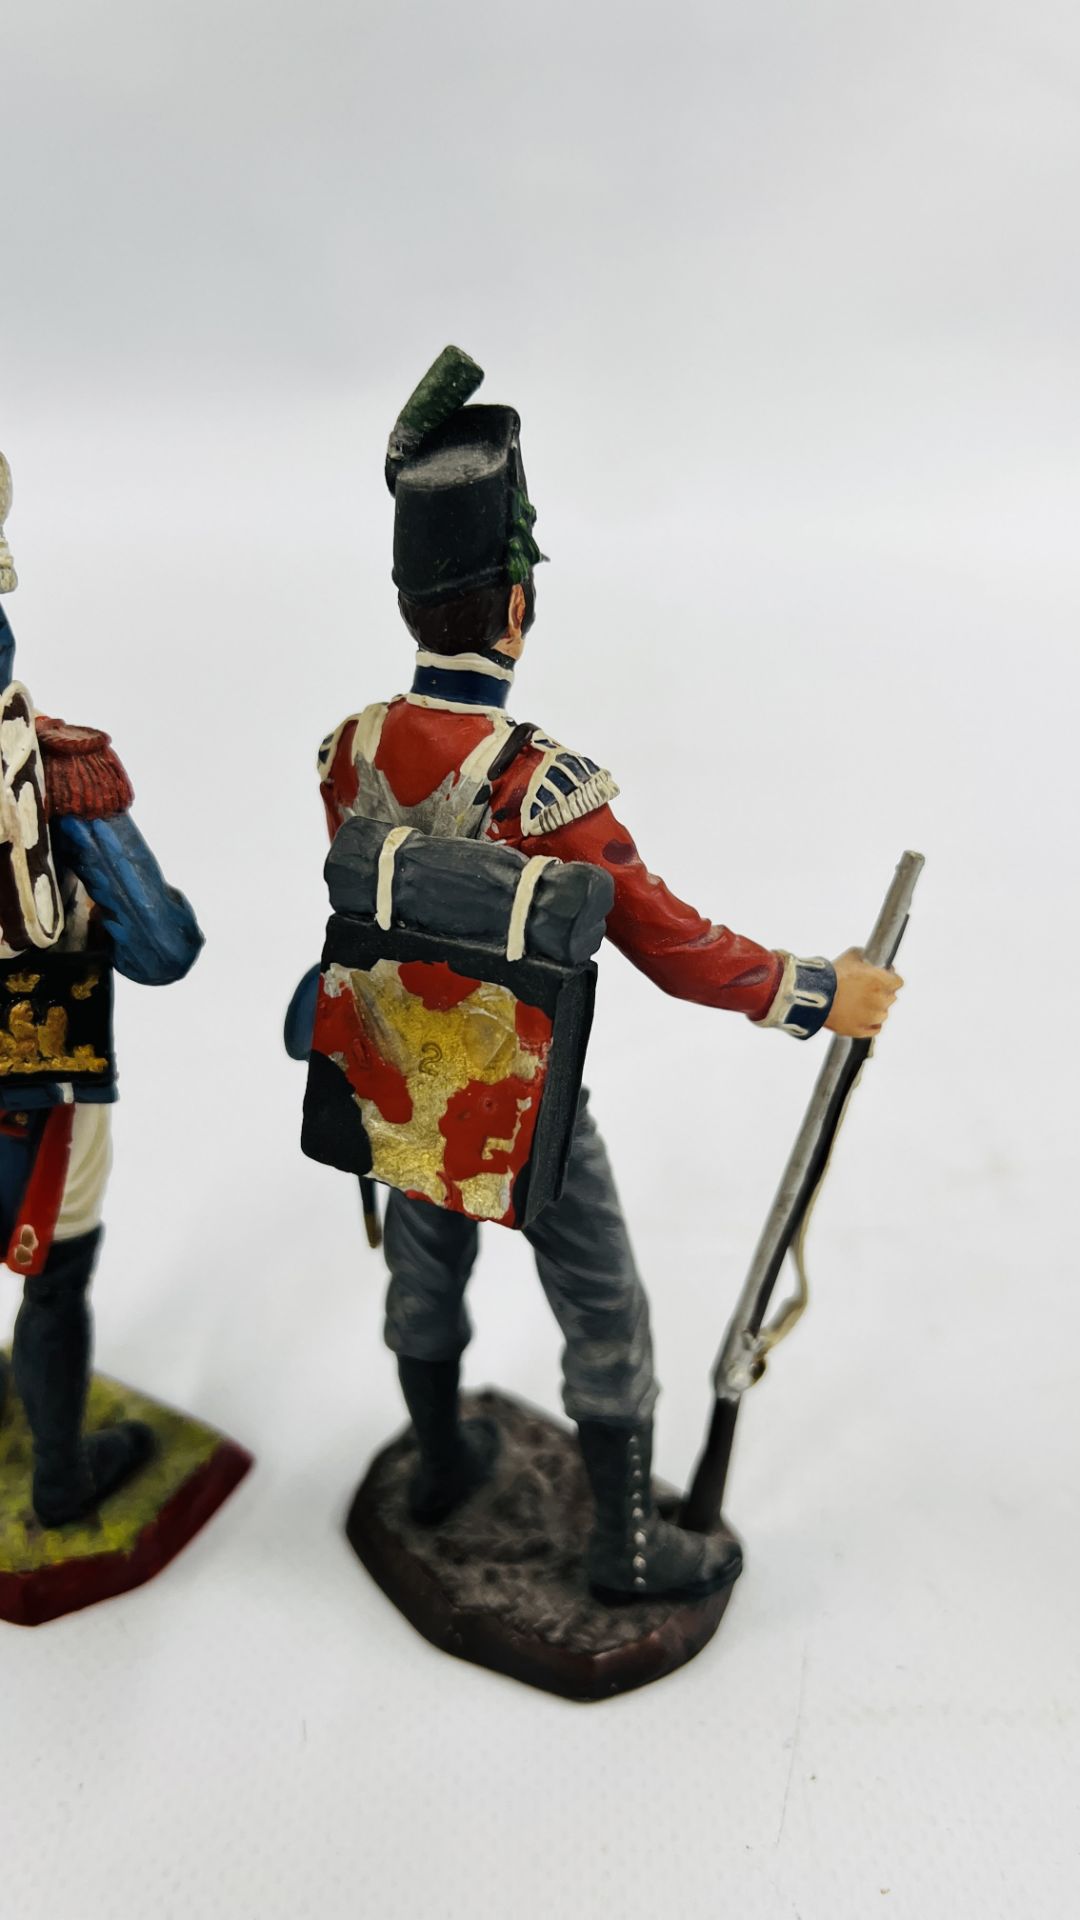 2 FRENCH LEAD SOLDIER FIGURES - H 15CM. - Image 4 of 6